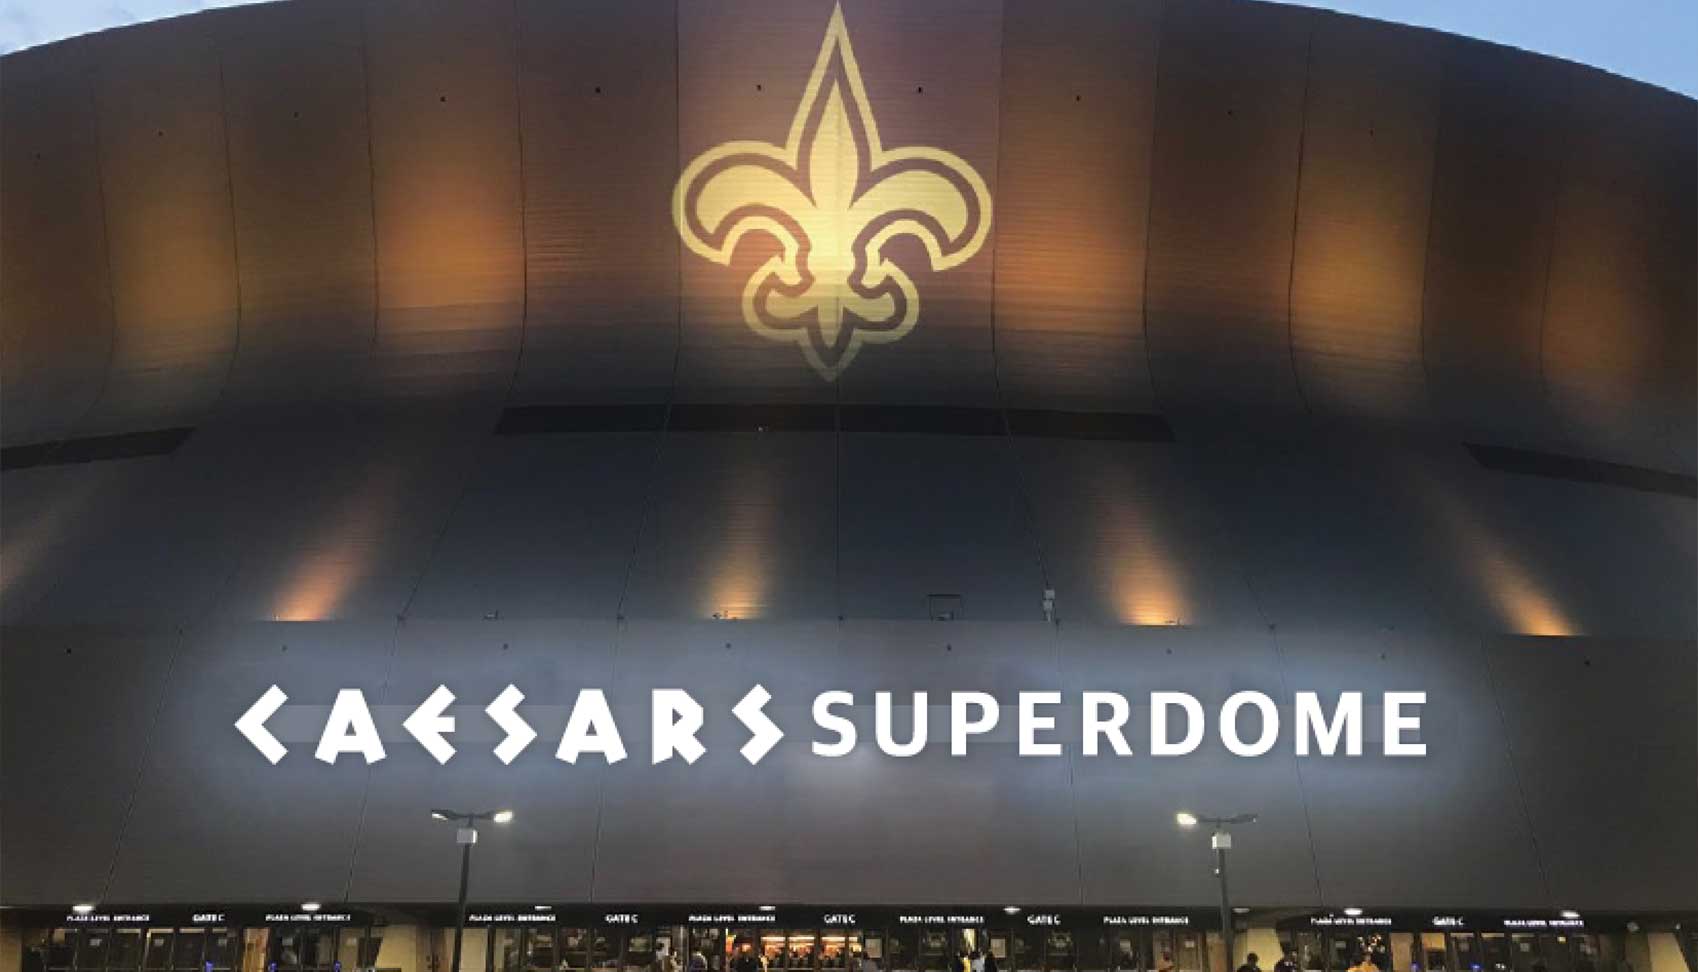 Champions Square Entrance rendering of the Caesars Superdome in New Orleans, LA. Credit: New Orleans Saints & Infinite Scale.